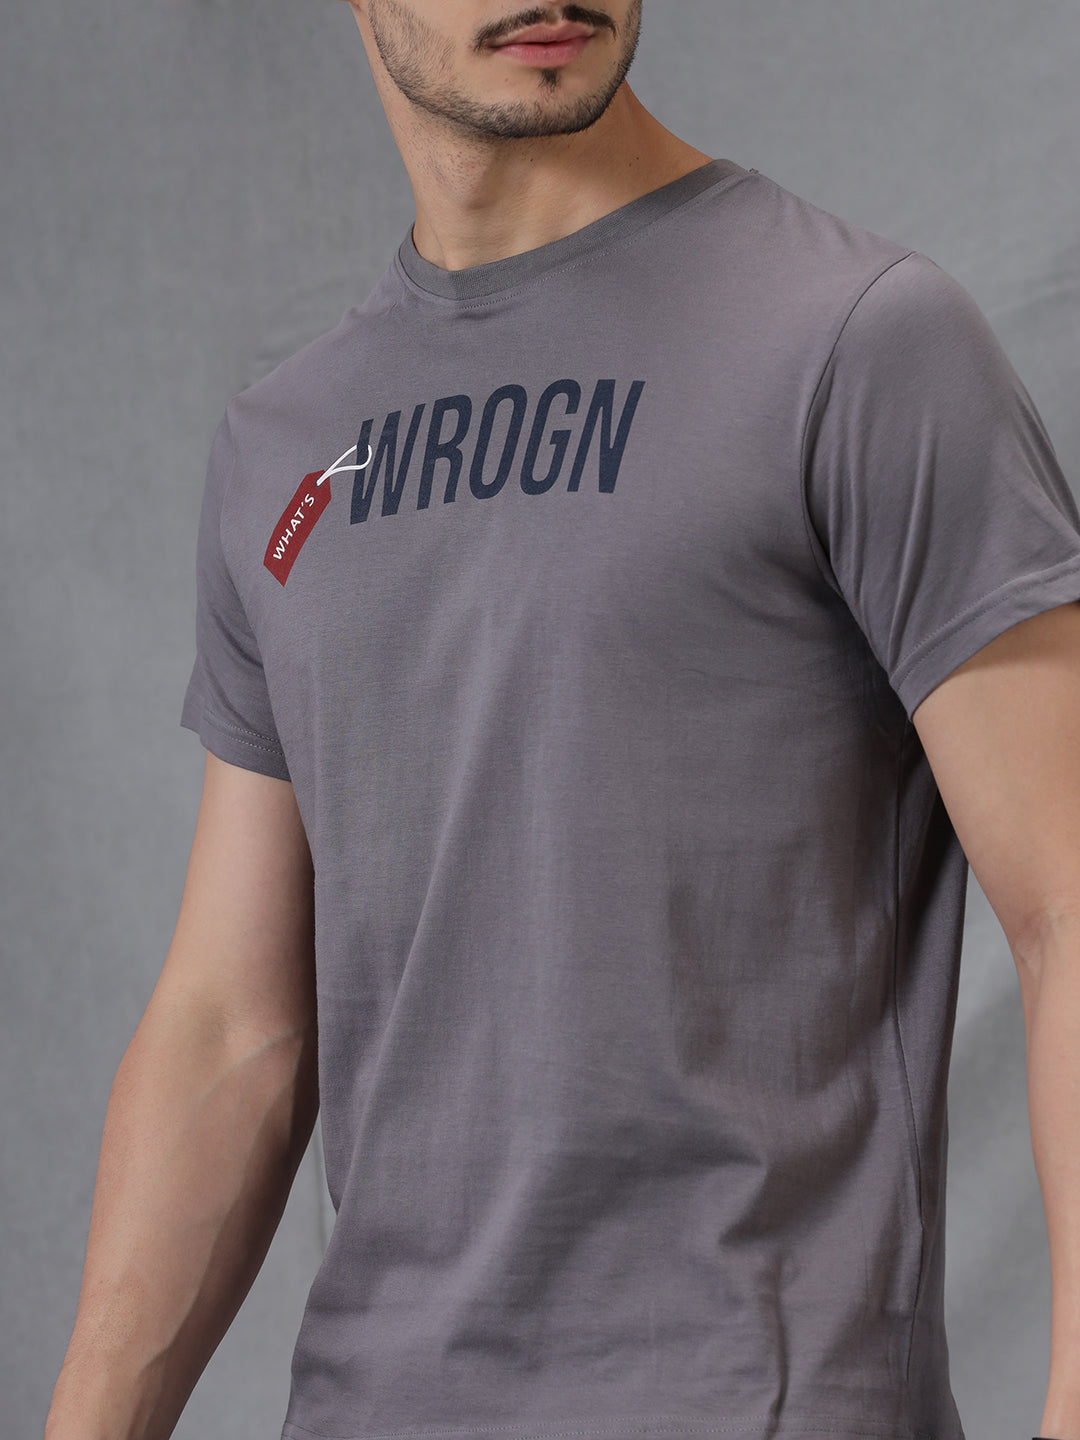 What's Wrogn Statement T-Shirt